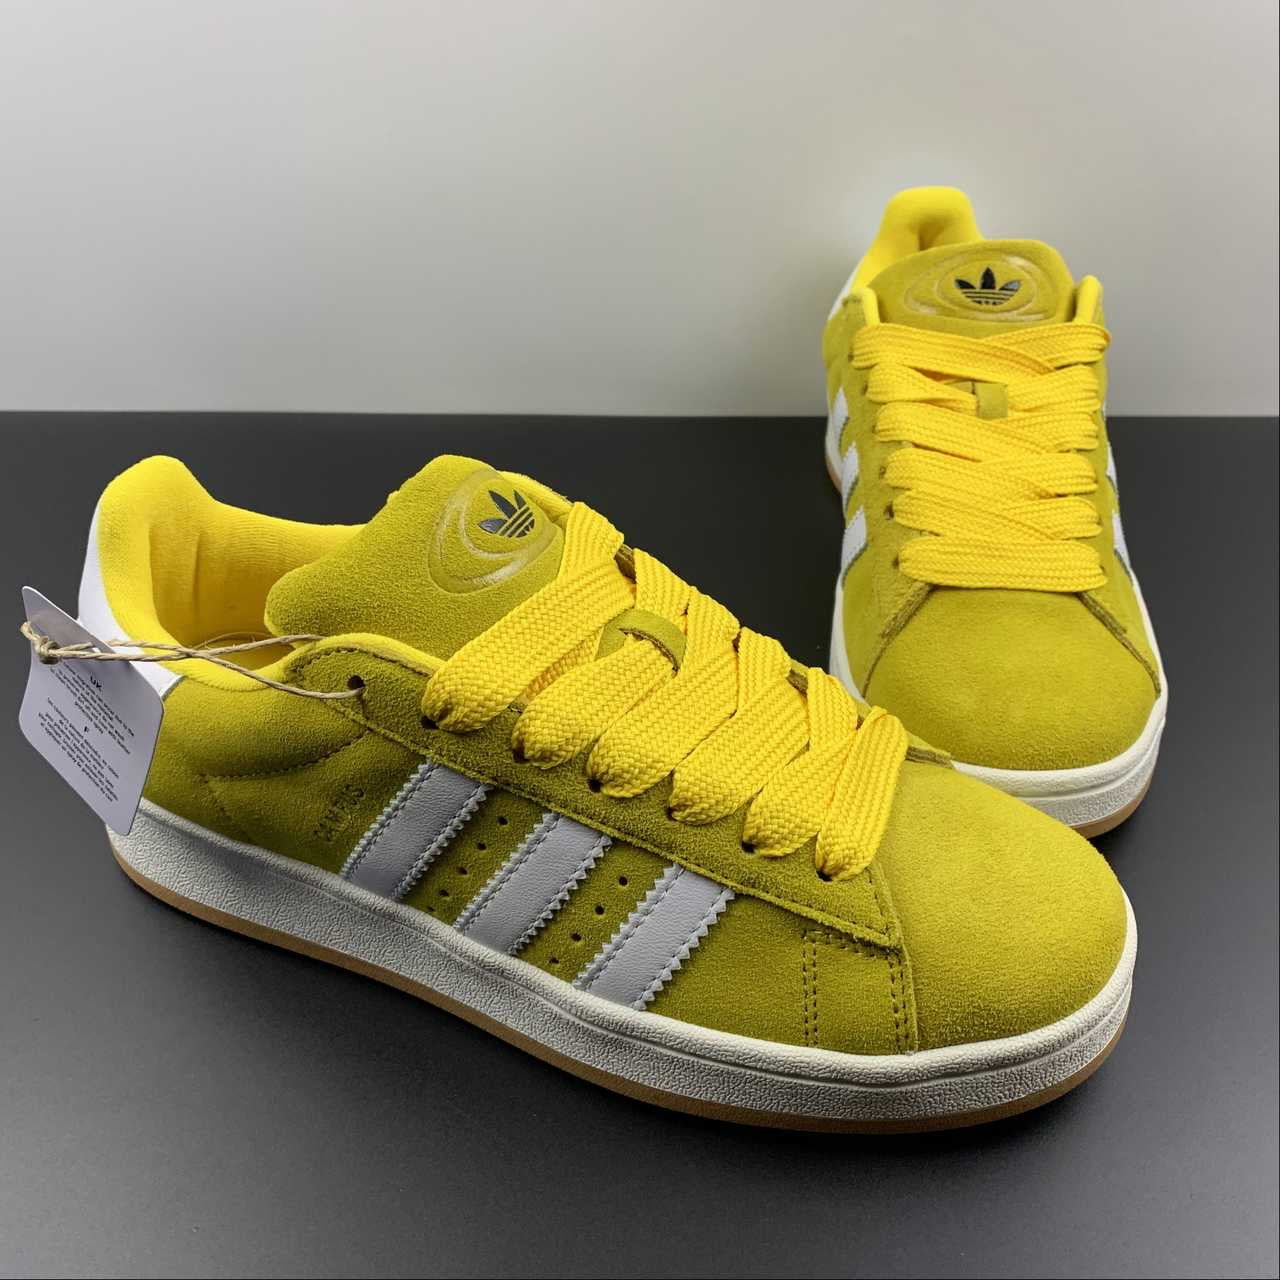 Adidas campus yellow shoes